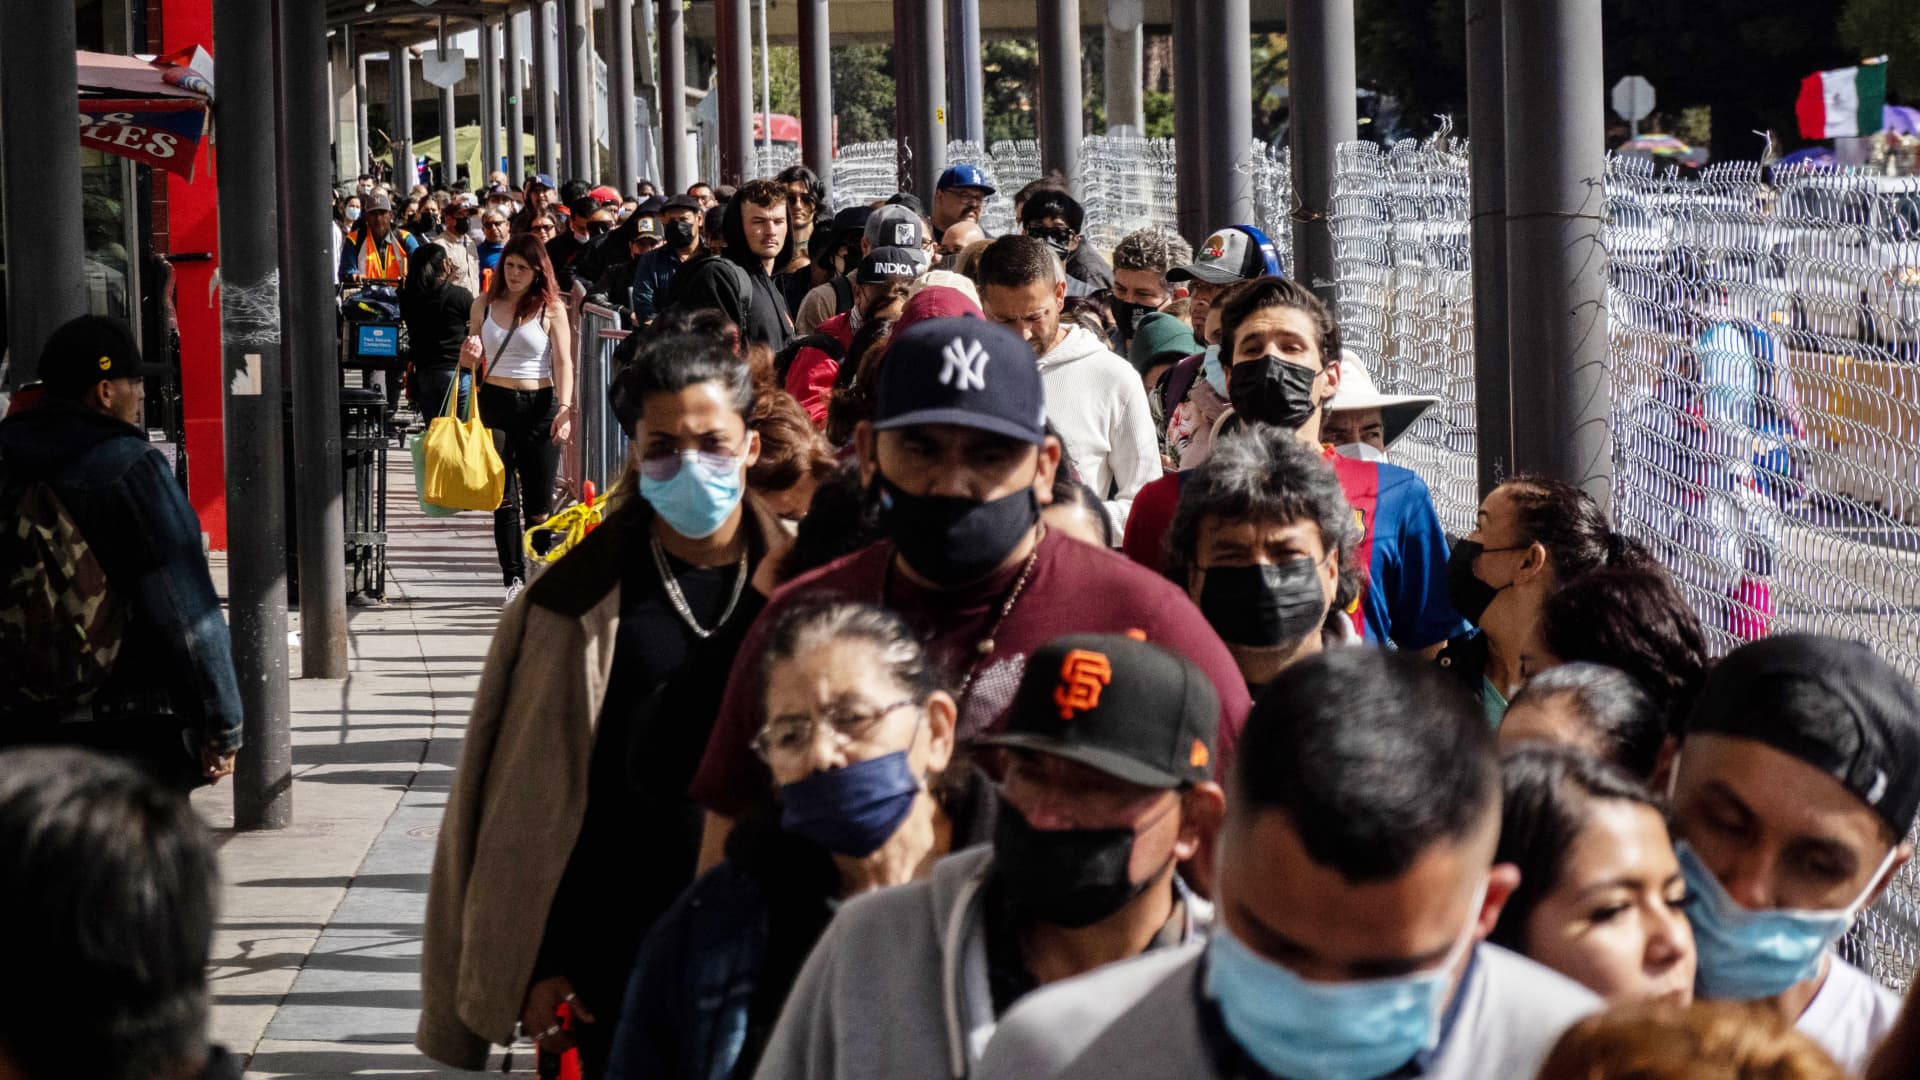 CDC will end sweeping order used to expel migrants at U.S. borders during Covid pandemic